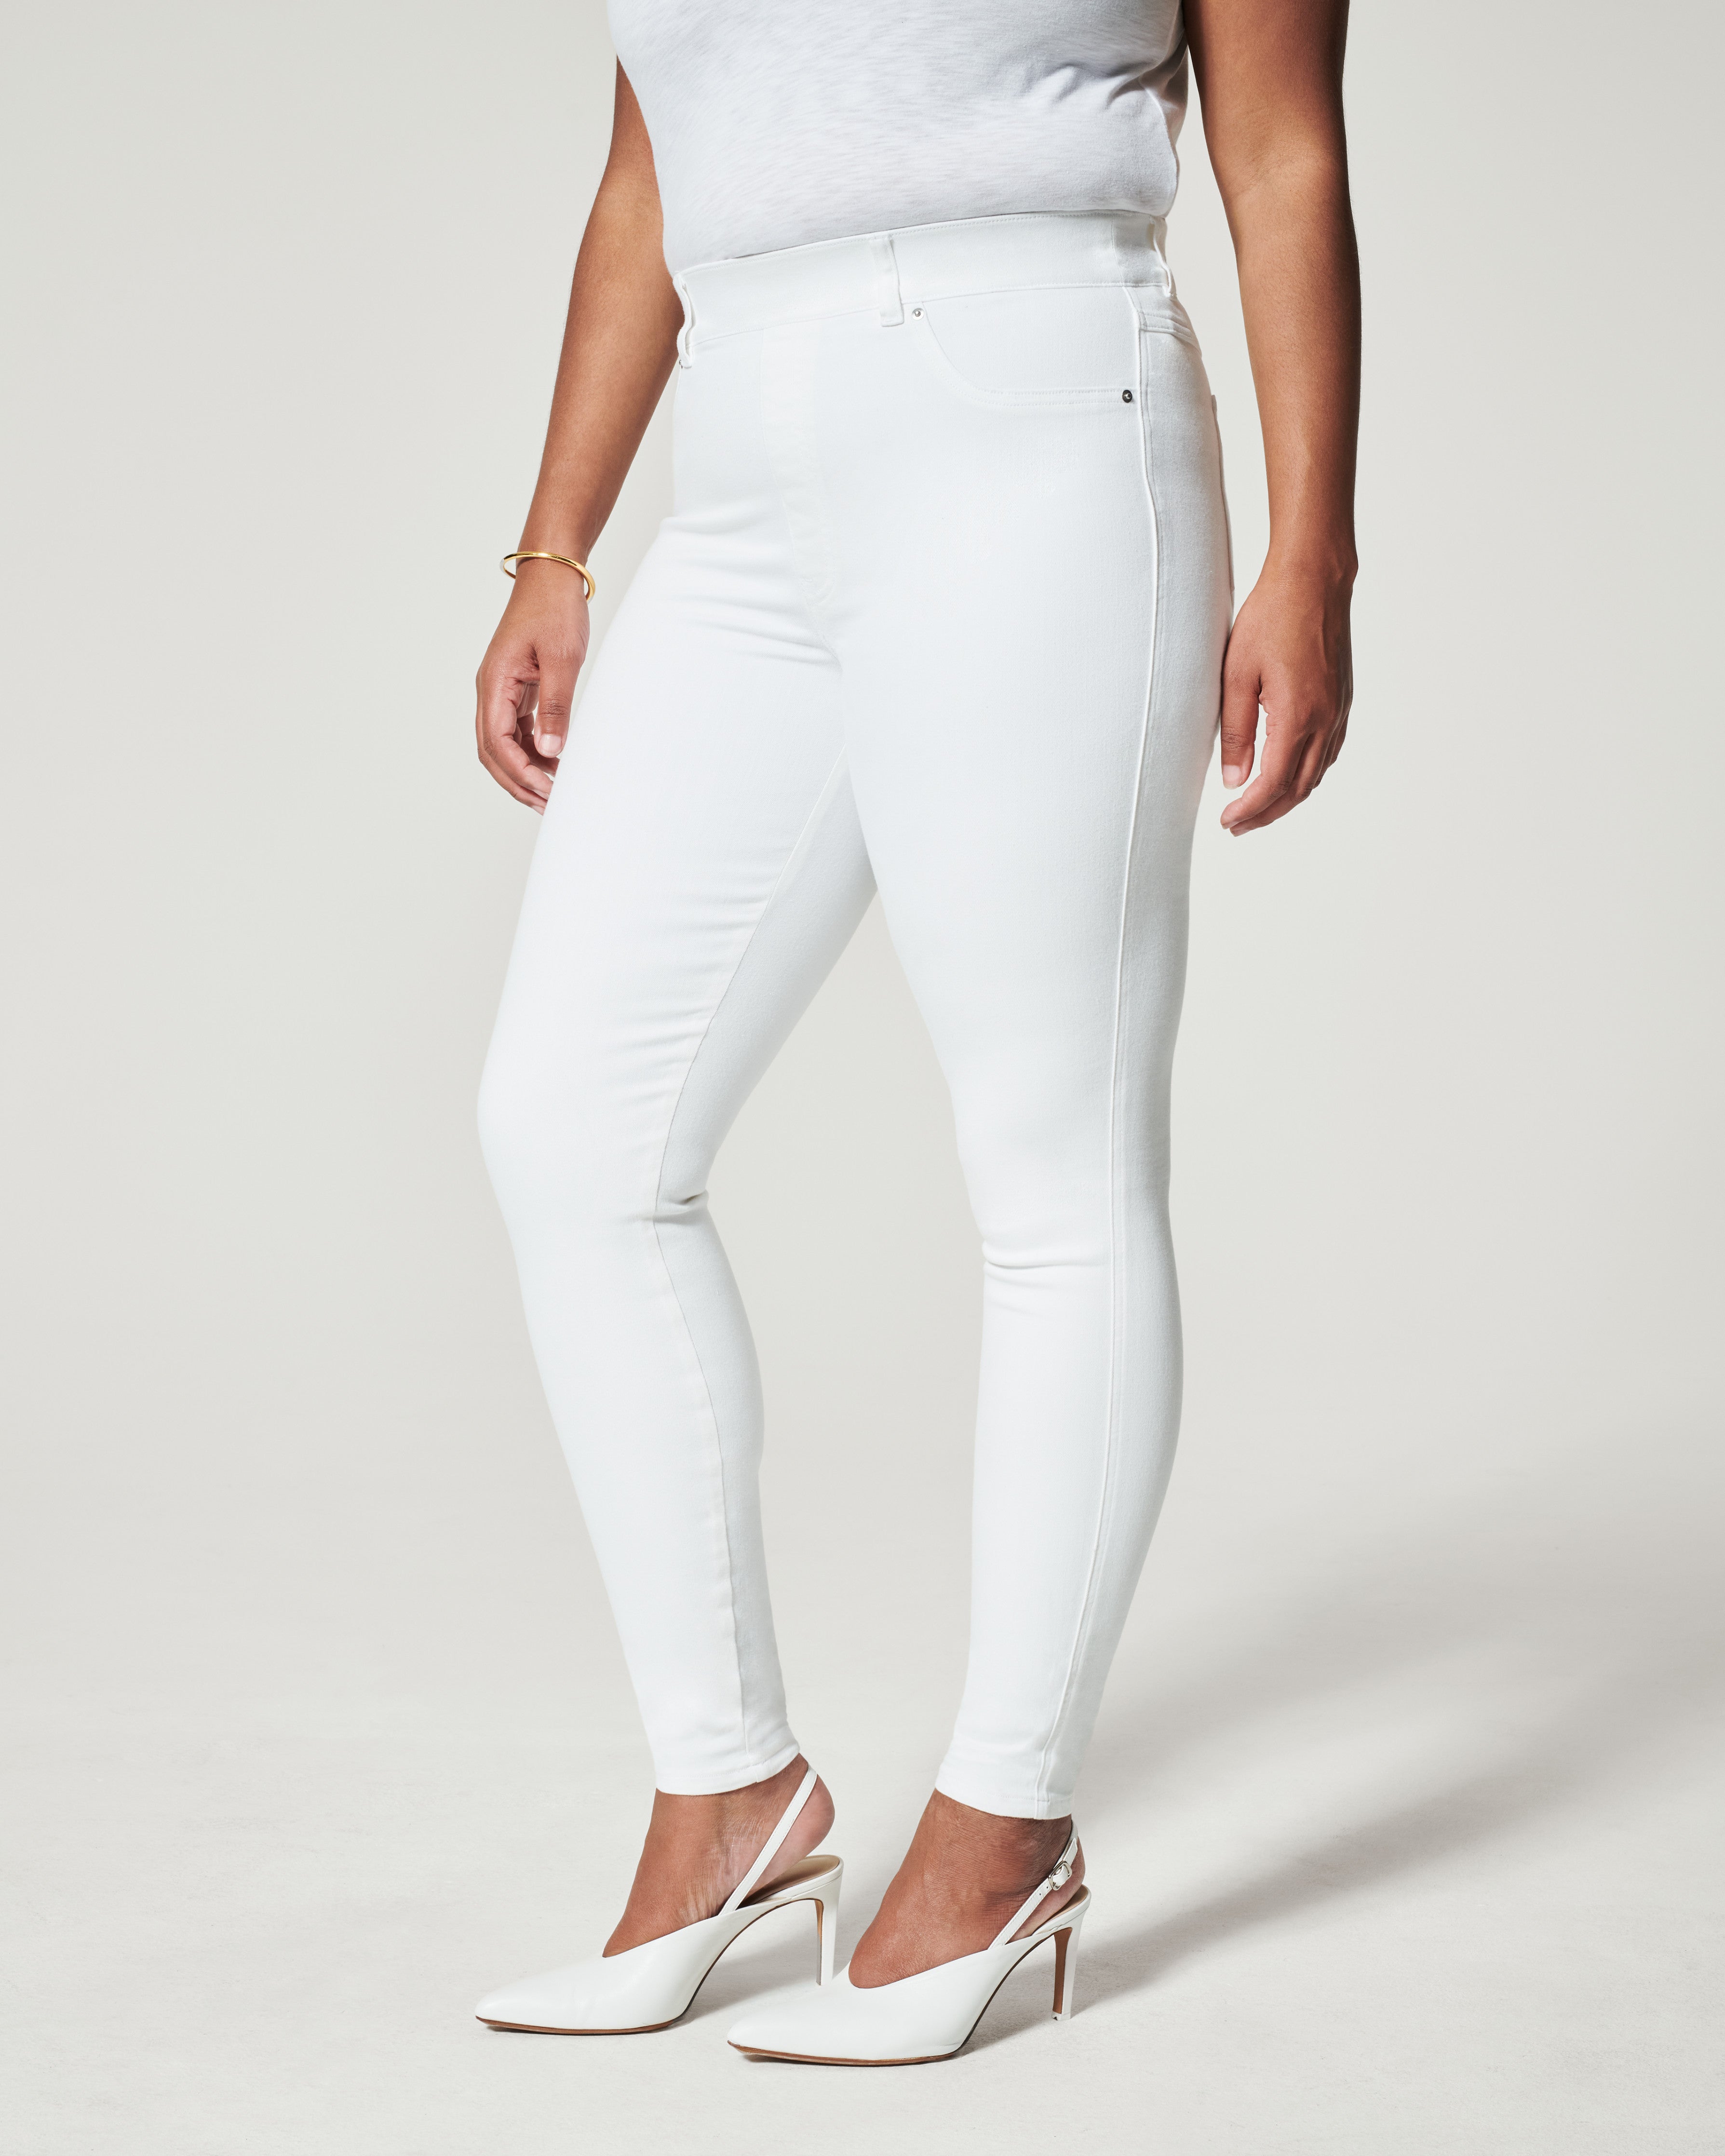 White jeans & pants from @spanx ! Use code CBSTYLEDXSPANX for 10% off (+  free shipping & duty-free)! Which one is your fave? 1. Twill cr